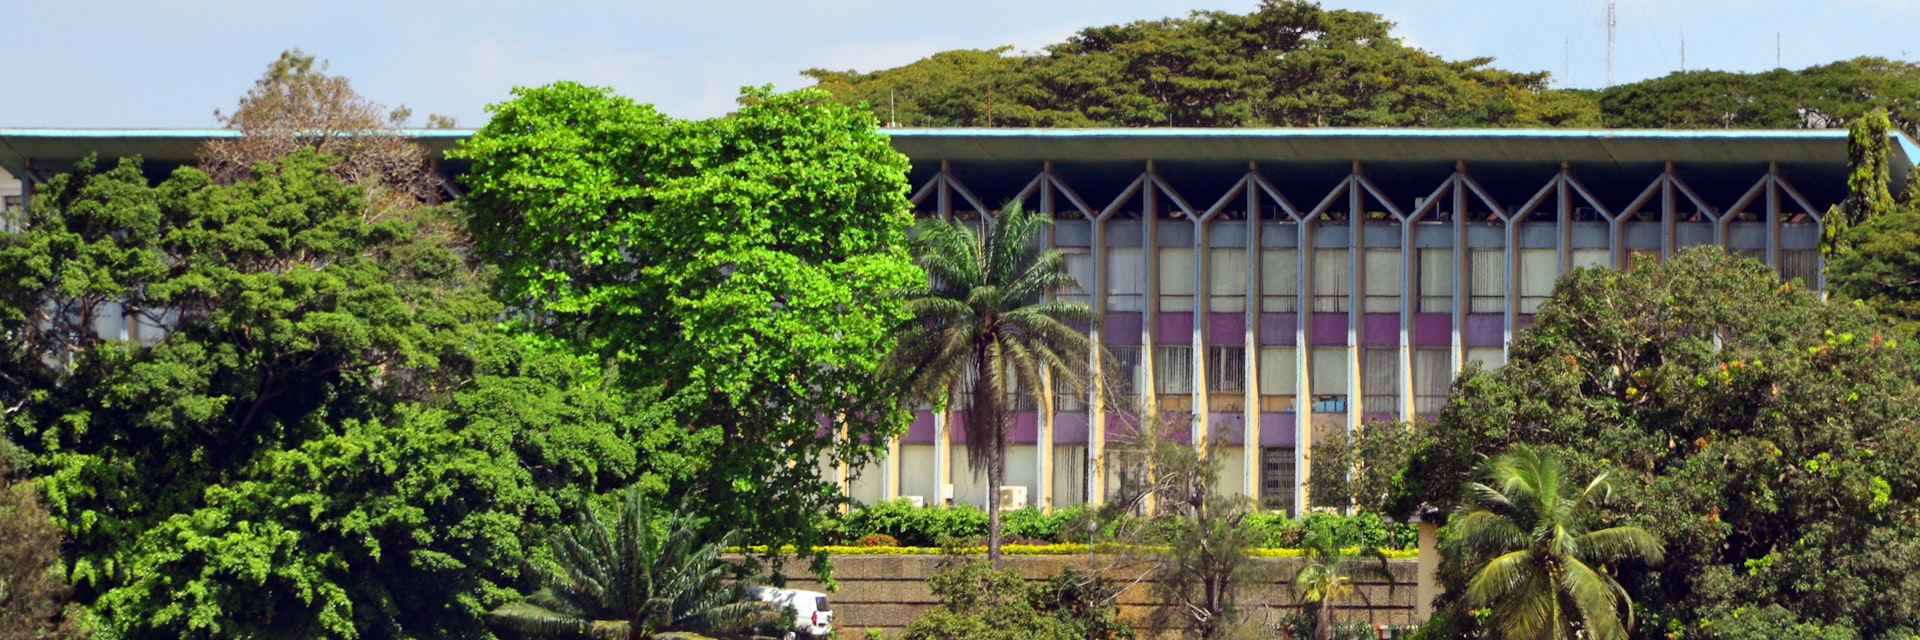 Abidjan, Ivory Coast / Côte d'Ivoire: completed in 1961, the presidential palace of Abidjan was designed by the French architect Pierre Dufau, and paid by the French Republic - Plateau district.